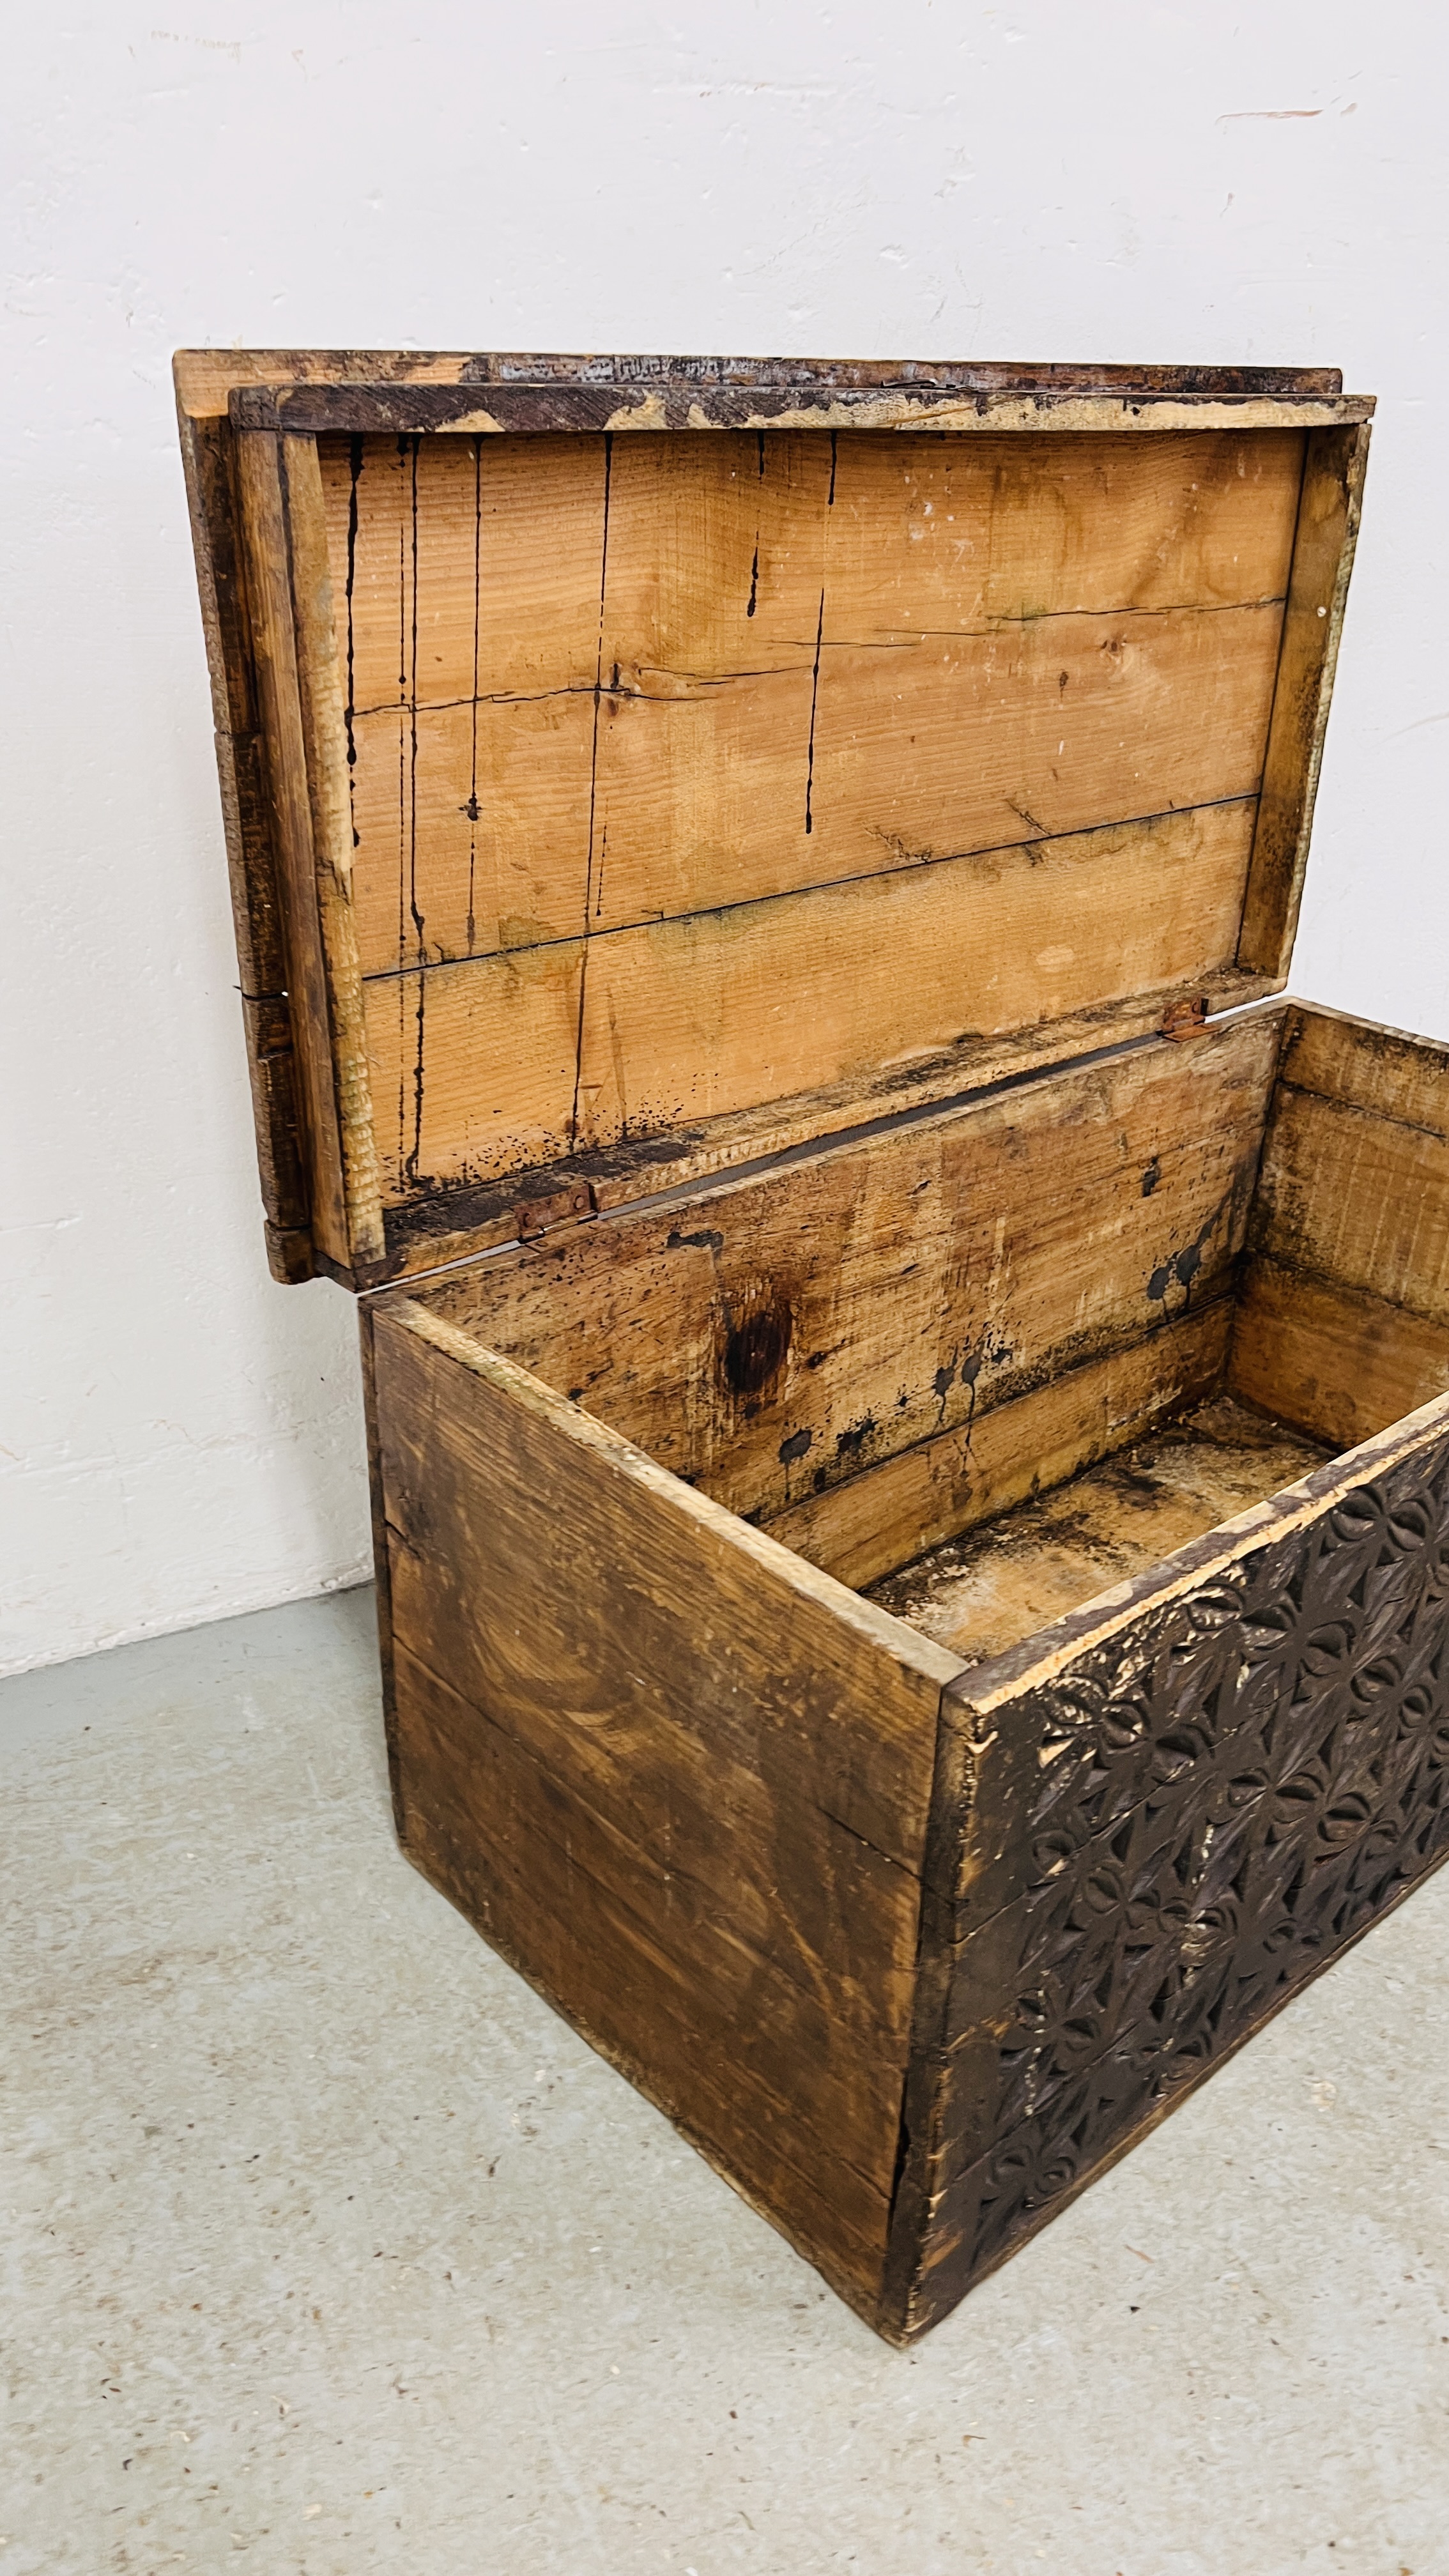 AN ANTIQUE PINE BLANKET CHEST WITH HAND CARVED FRONT PANEL WIDTH 85CM. DEPTH 43CM. HEIGHT 42CM. - Image 9 of 9